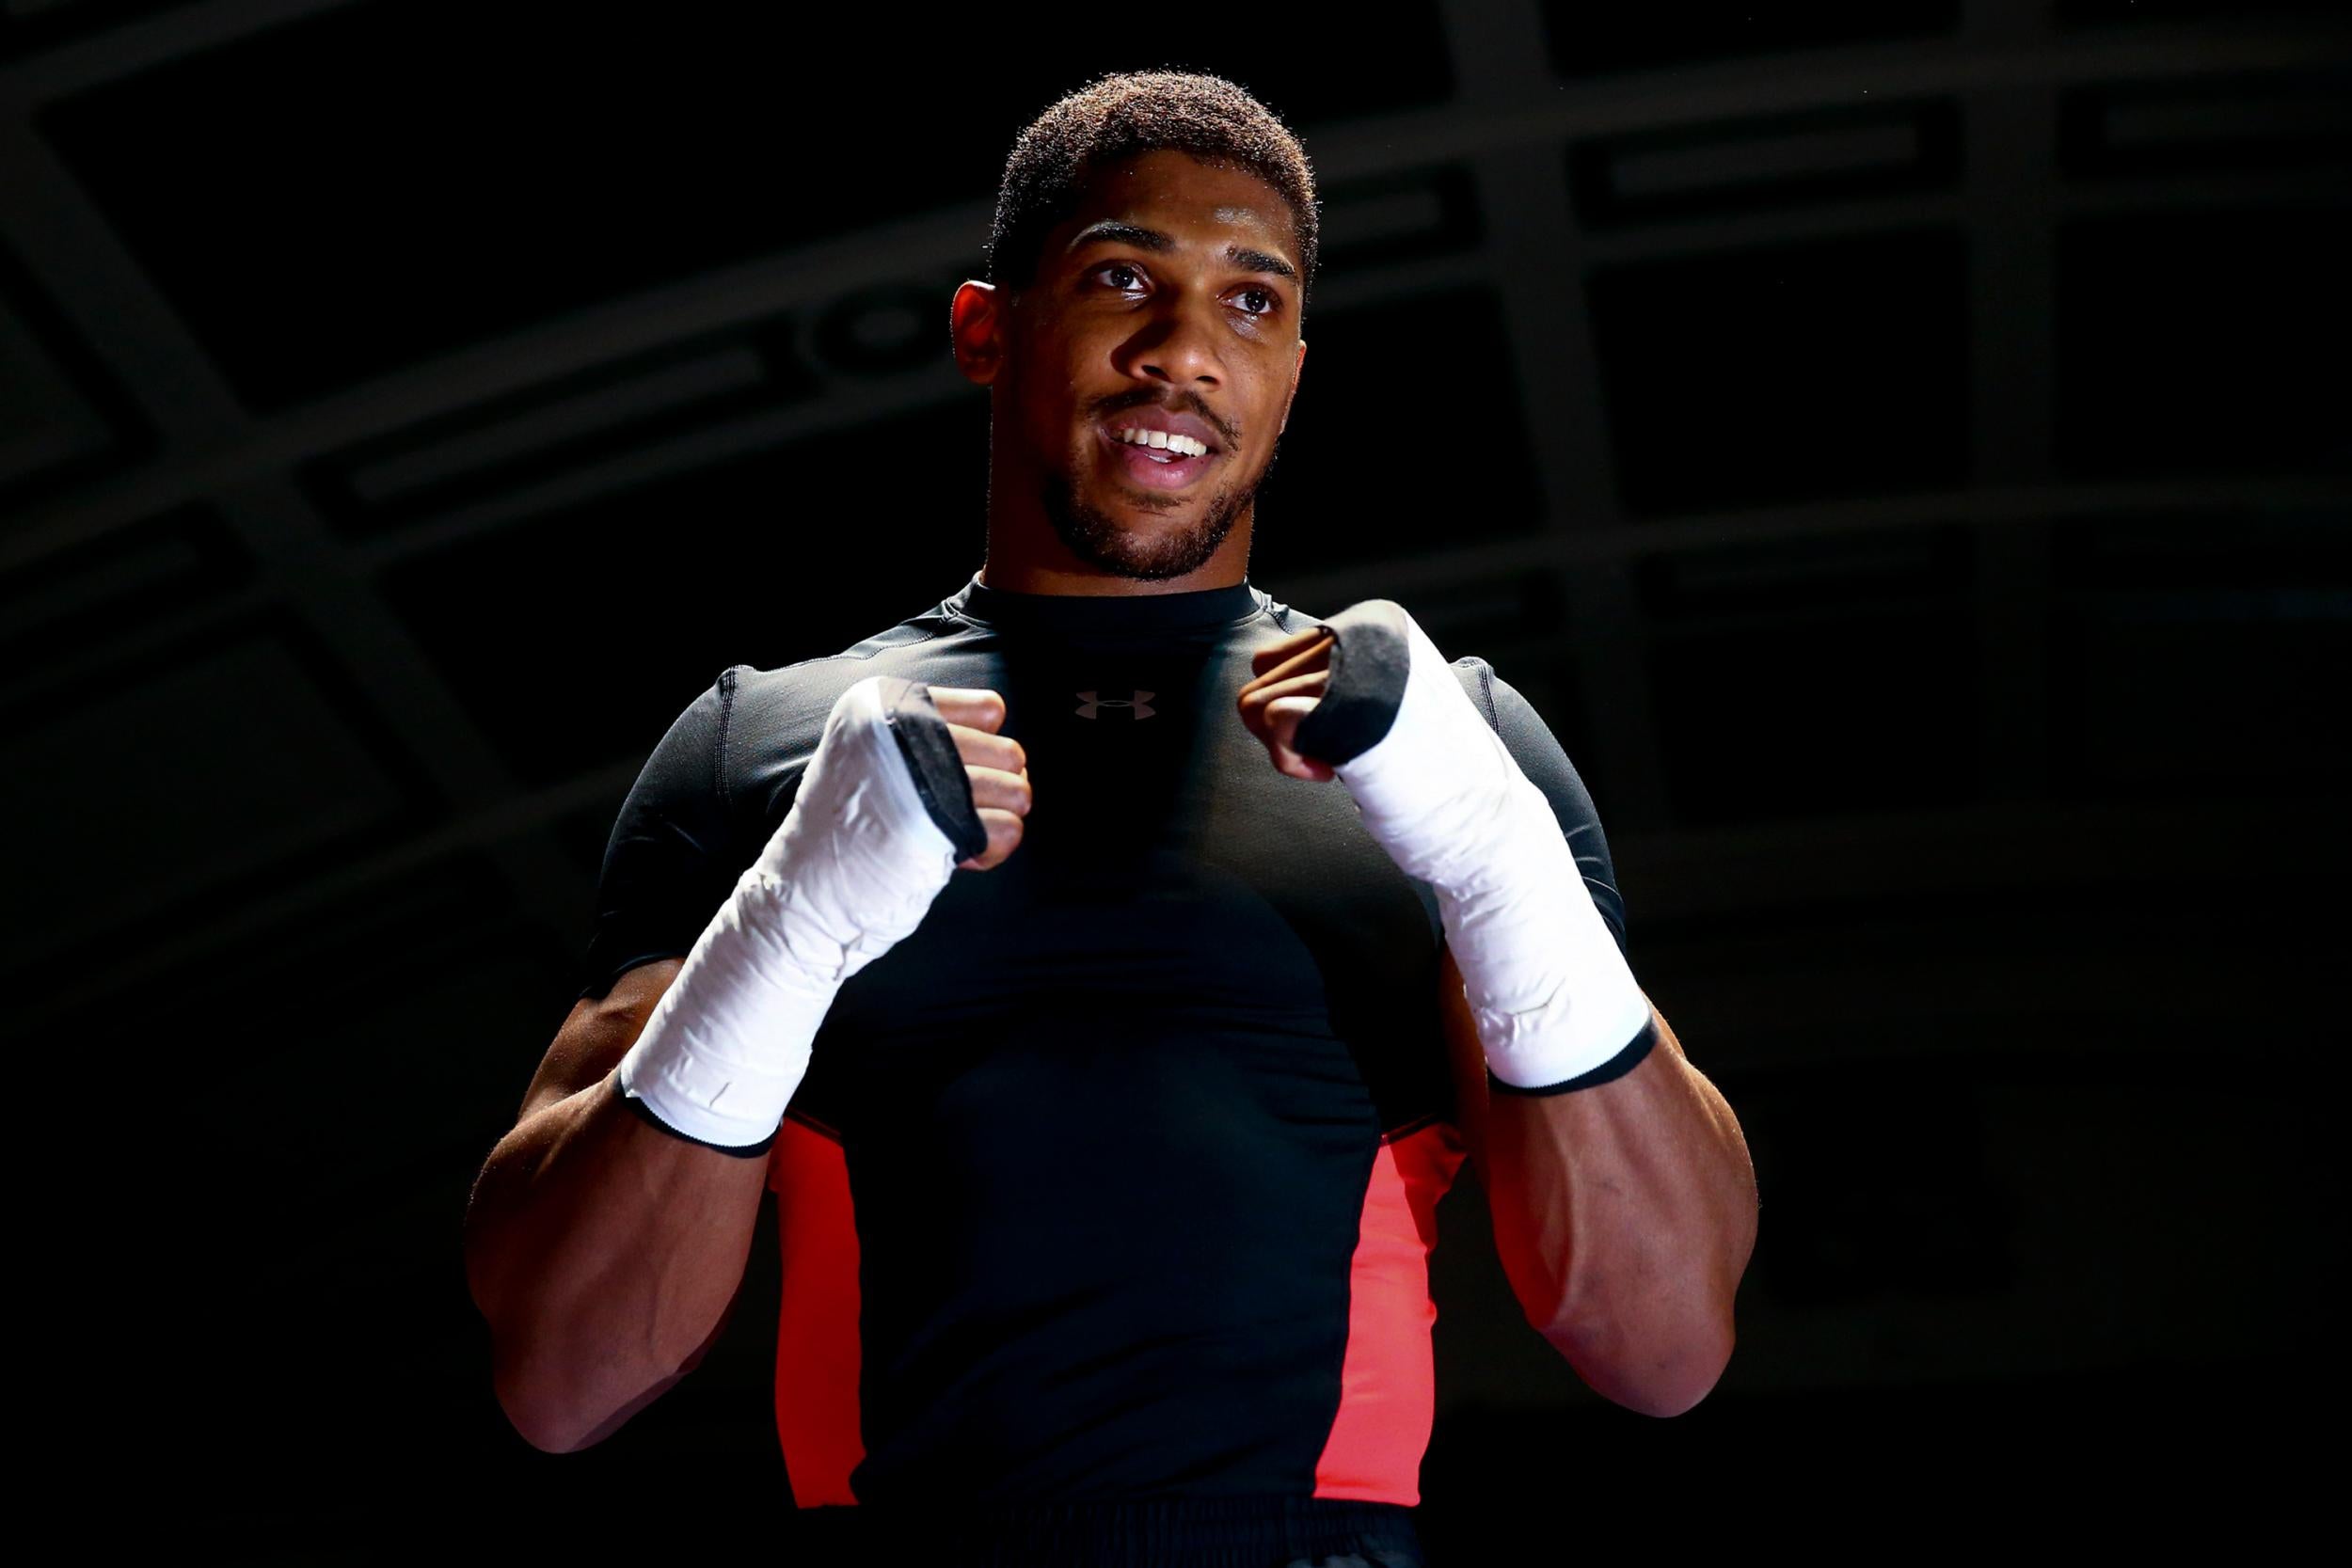 Anthony Joshua has contested just 32 rounds in his 15 pro fights so far